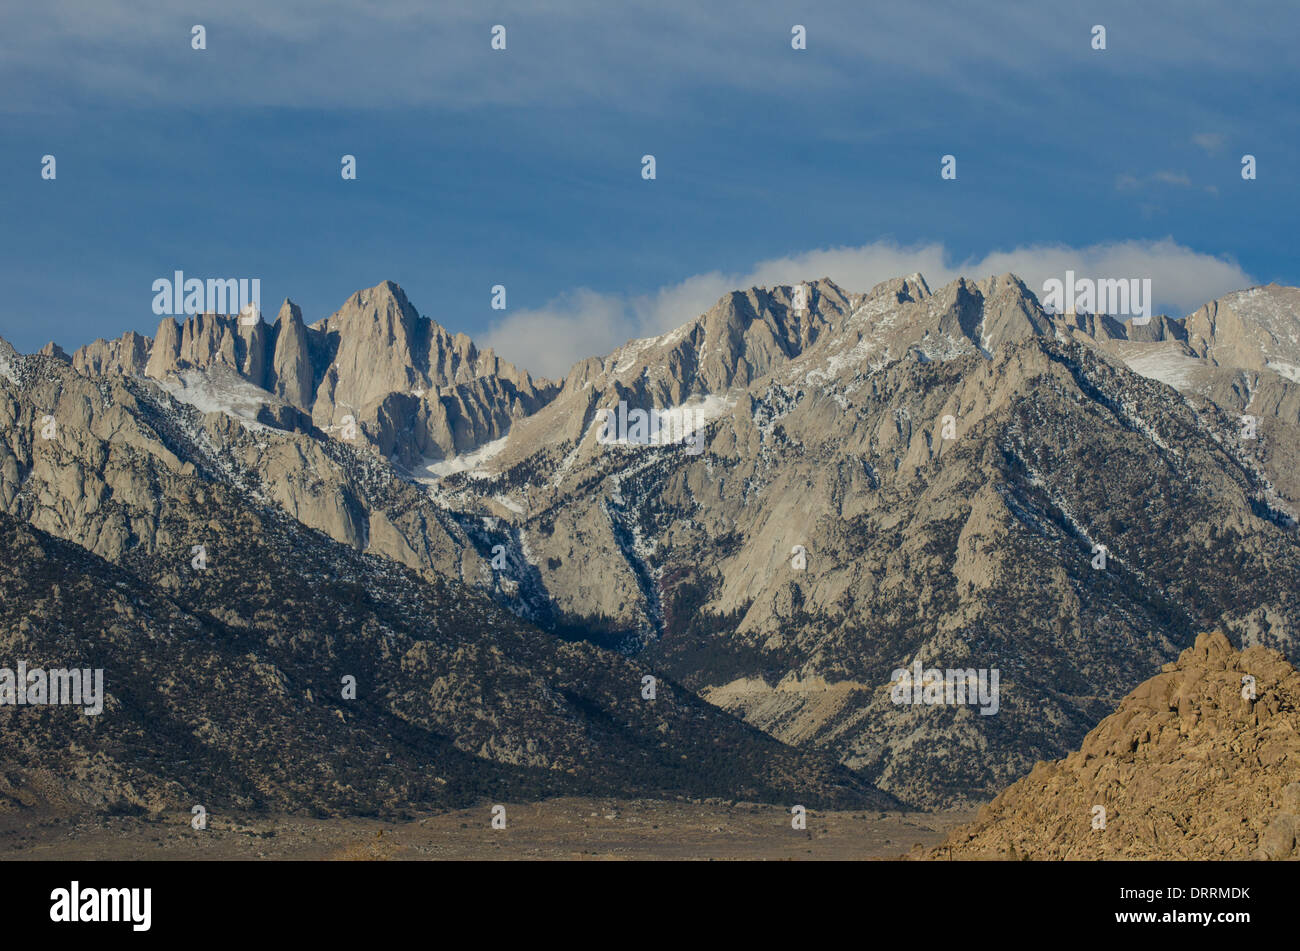 Mt Whitney, the peak on the left, from the Alabama Hills near Lone Pine, CA Stock Photo